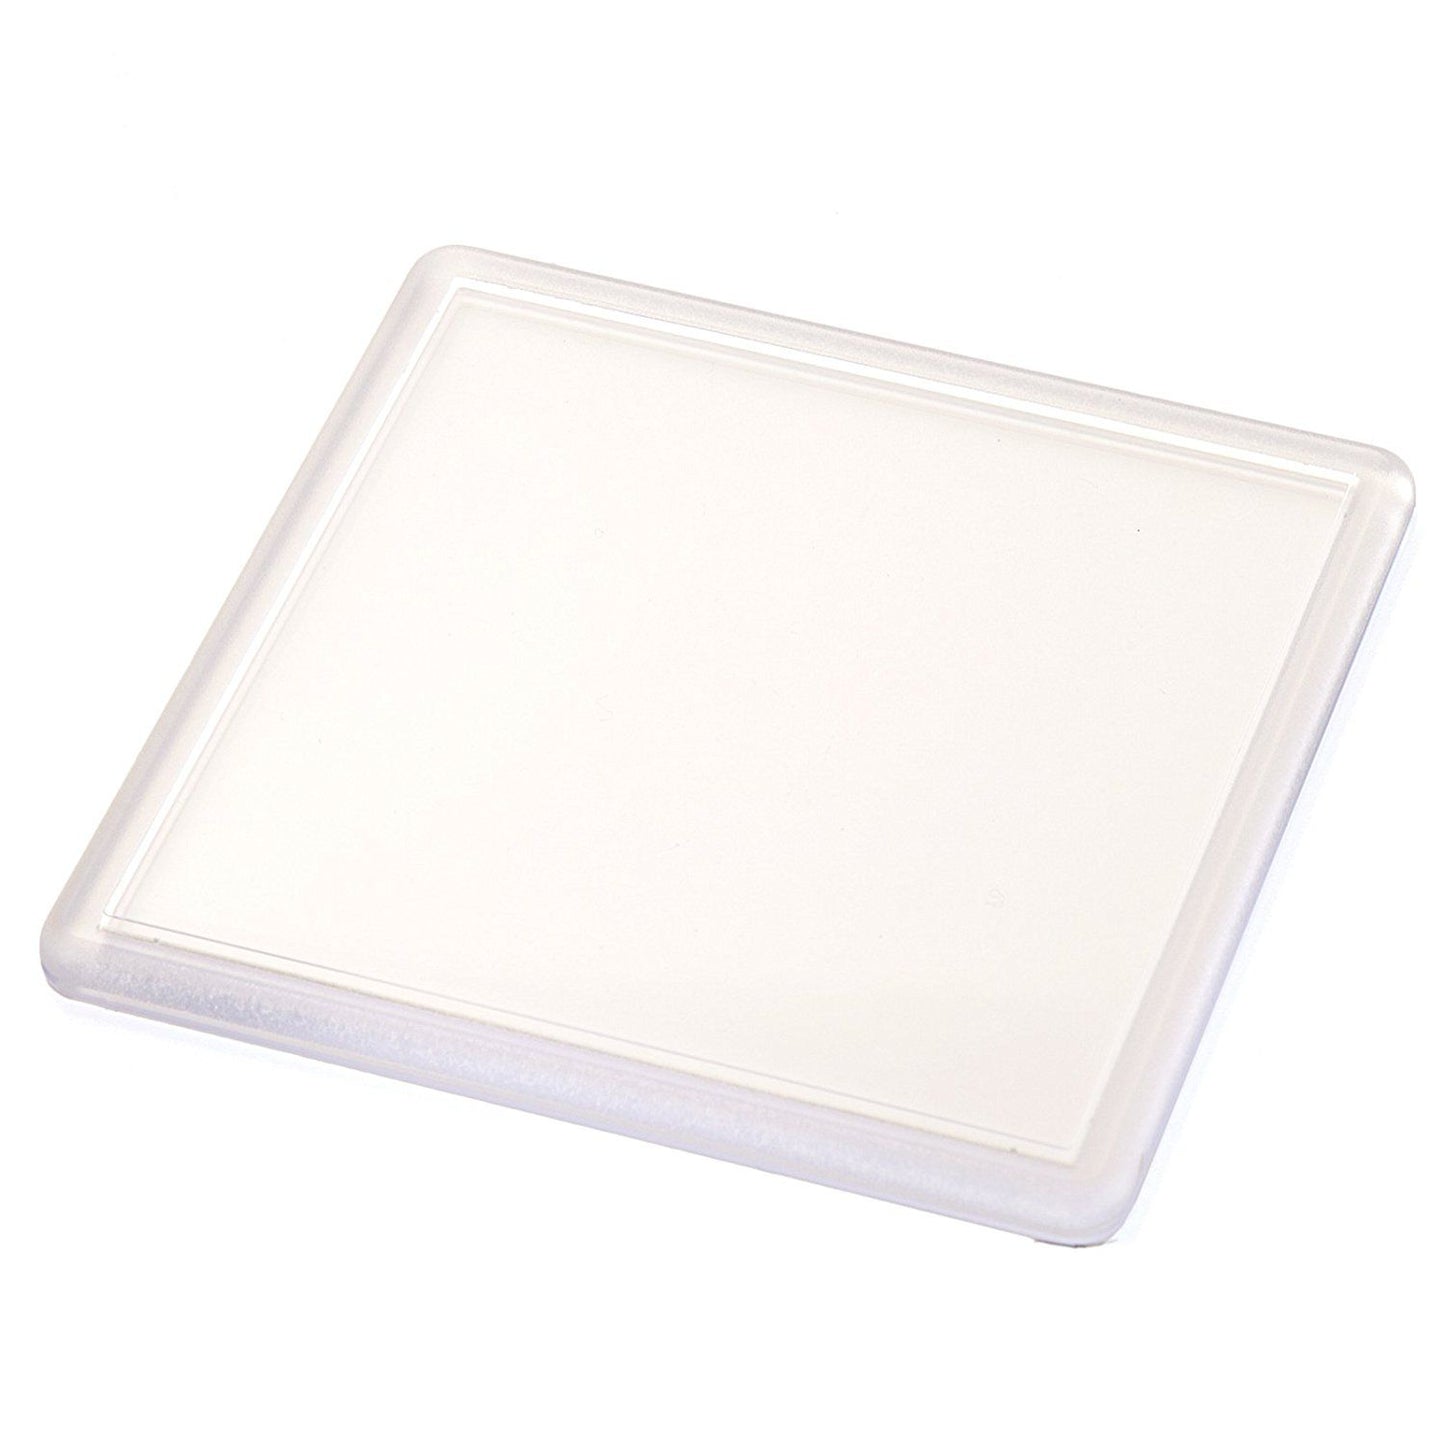 Clear View Coaster Square 90mmx90mm